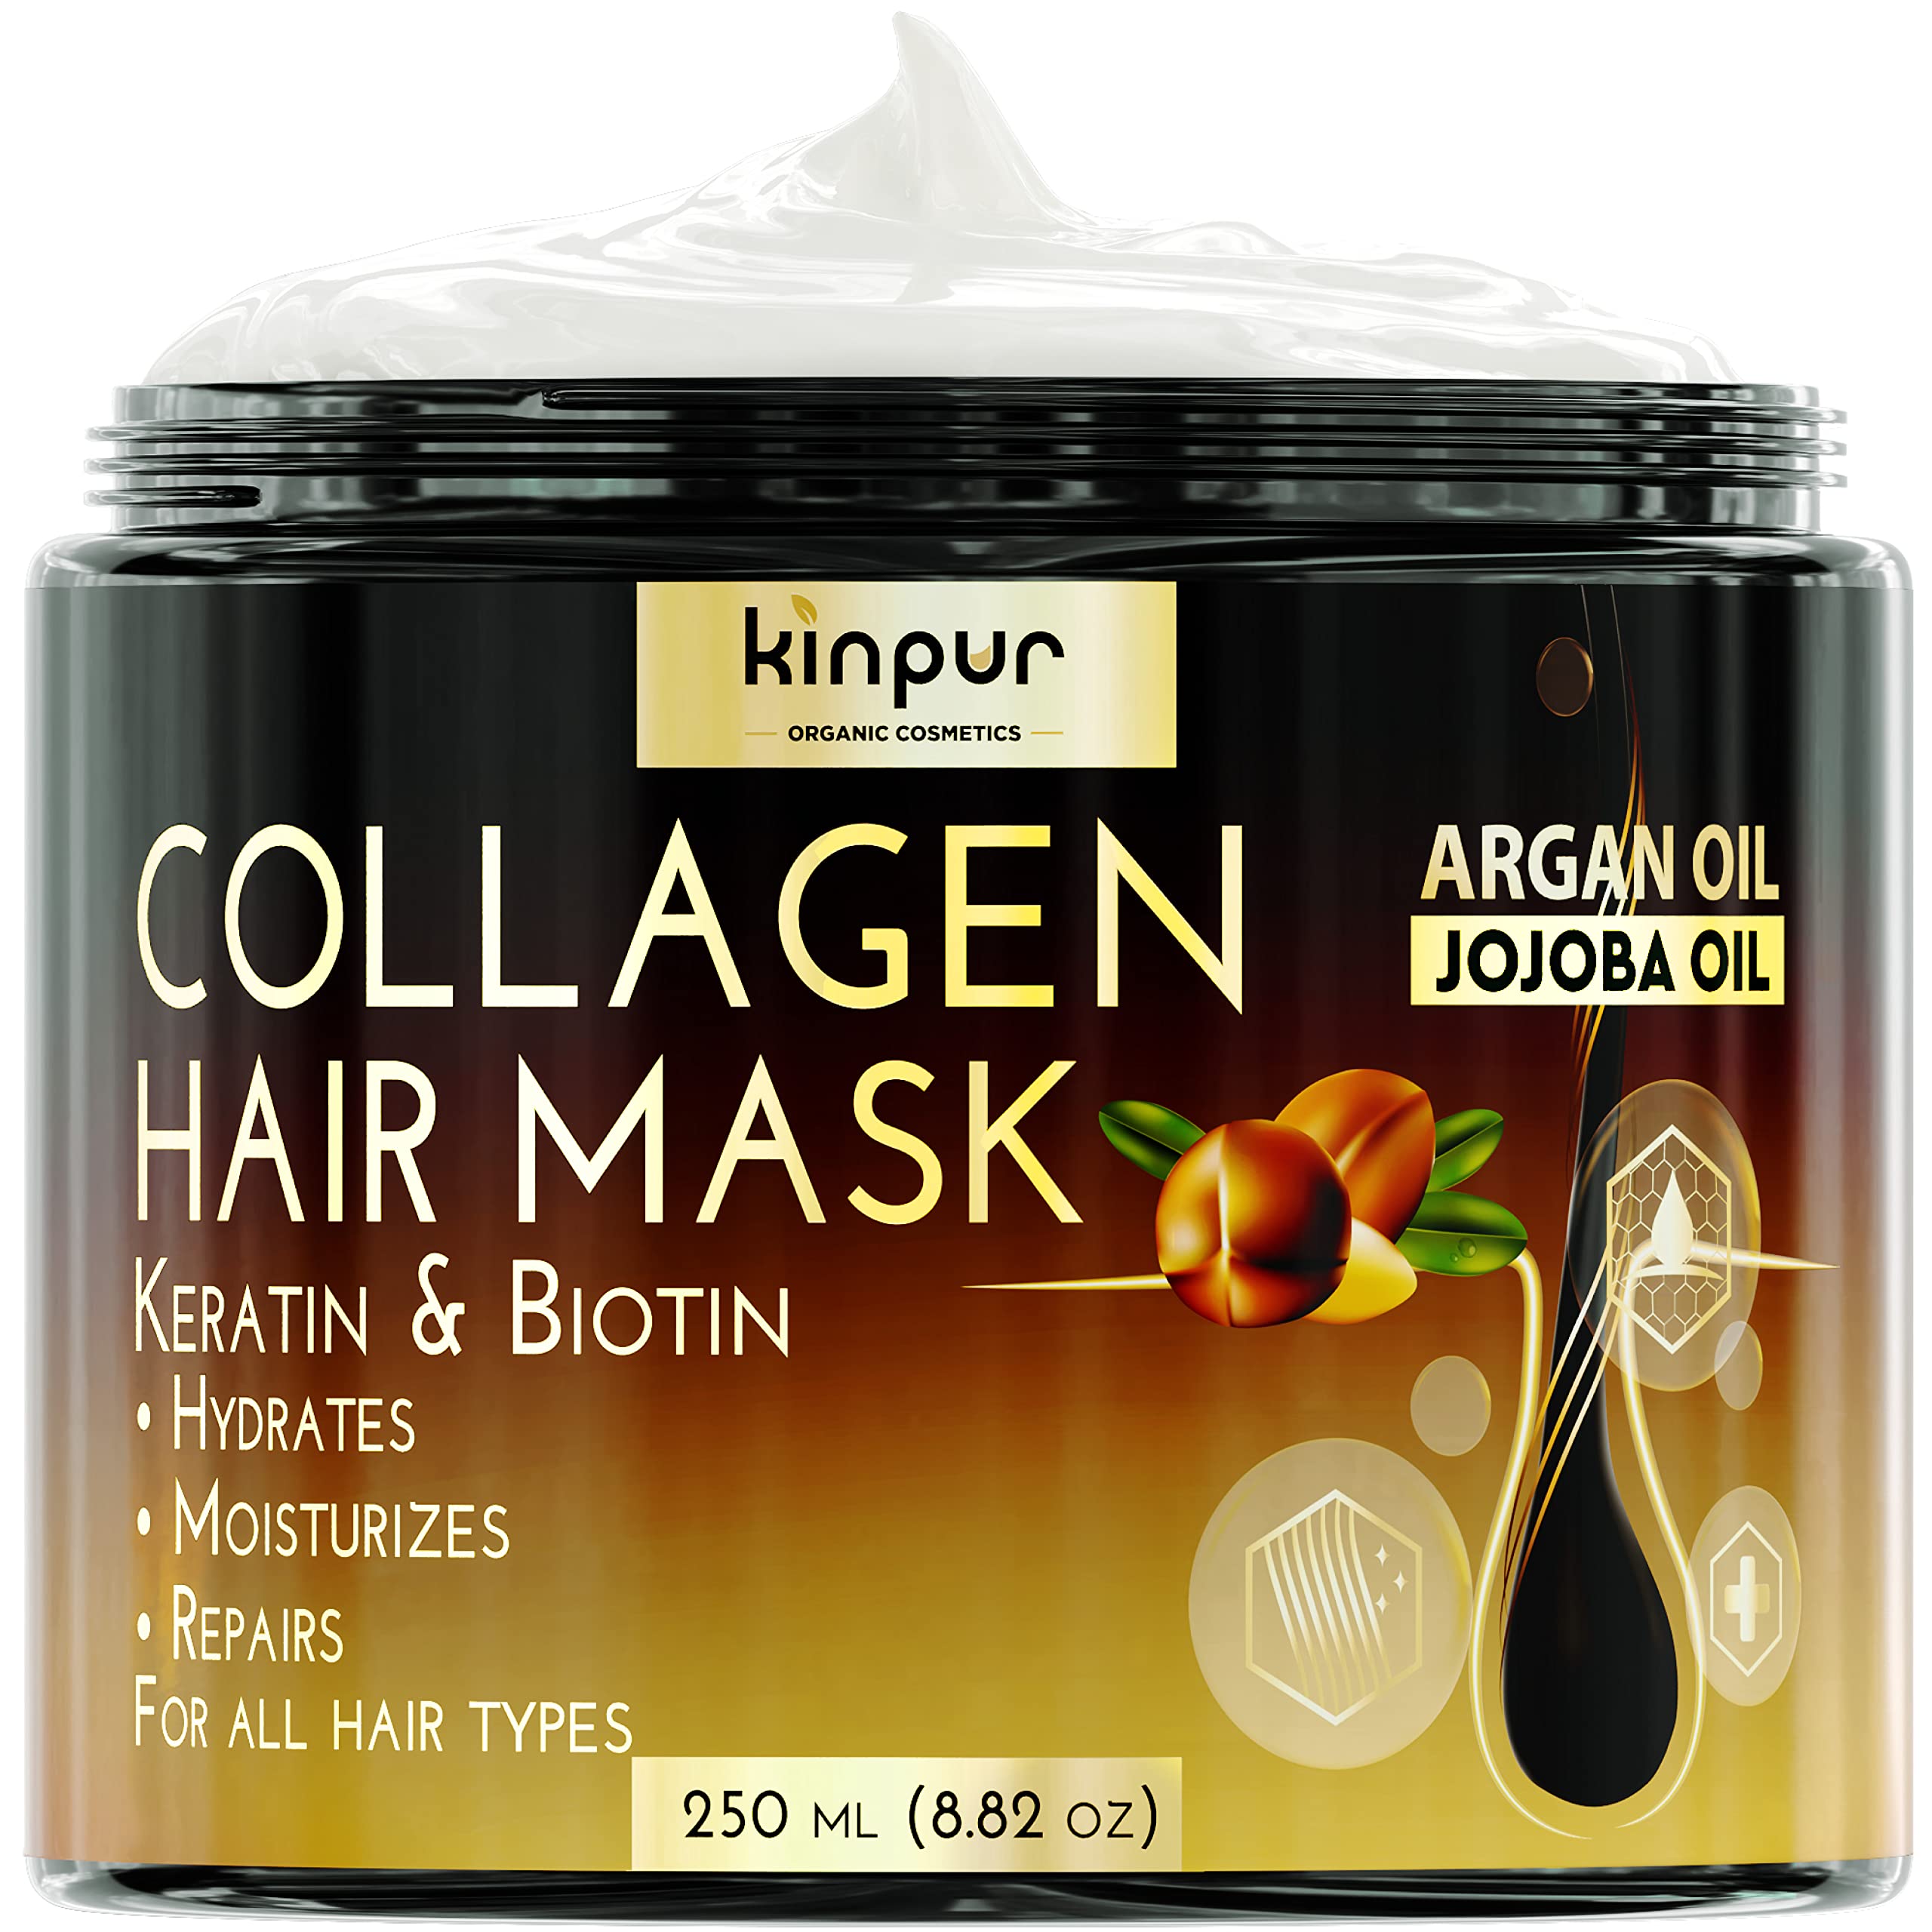 Hair Mask for Dry Damaged Hair with Collagen, Biotin, Argan Oil - Helps  Repair Hair and Reduce